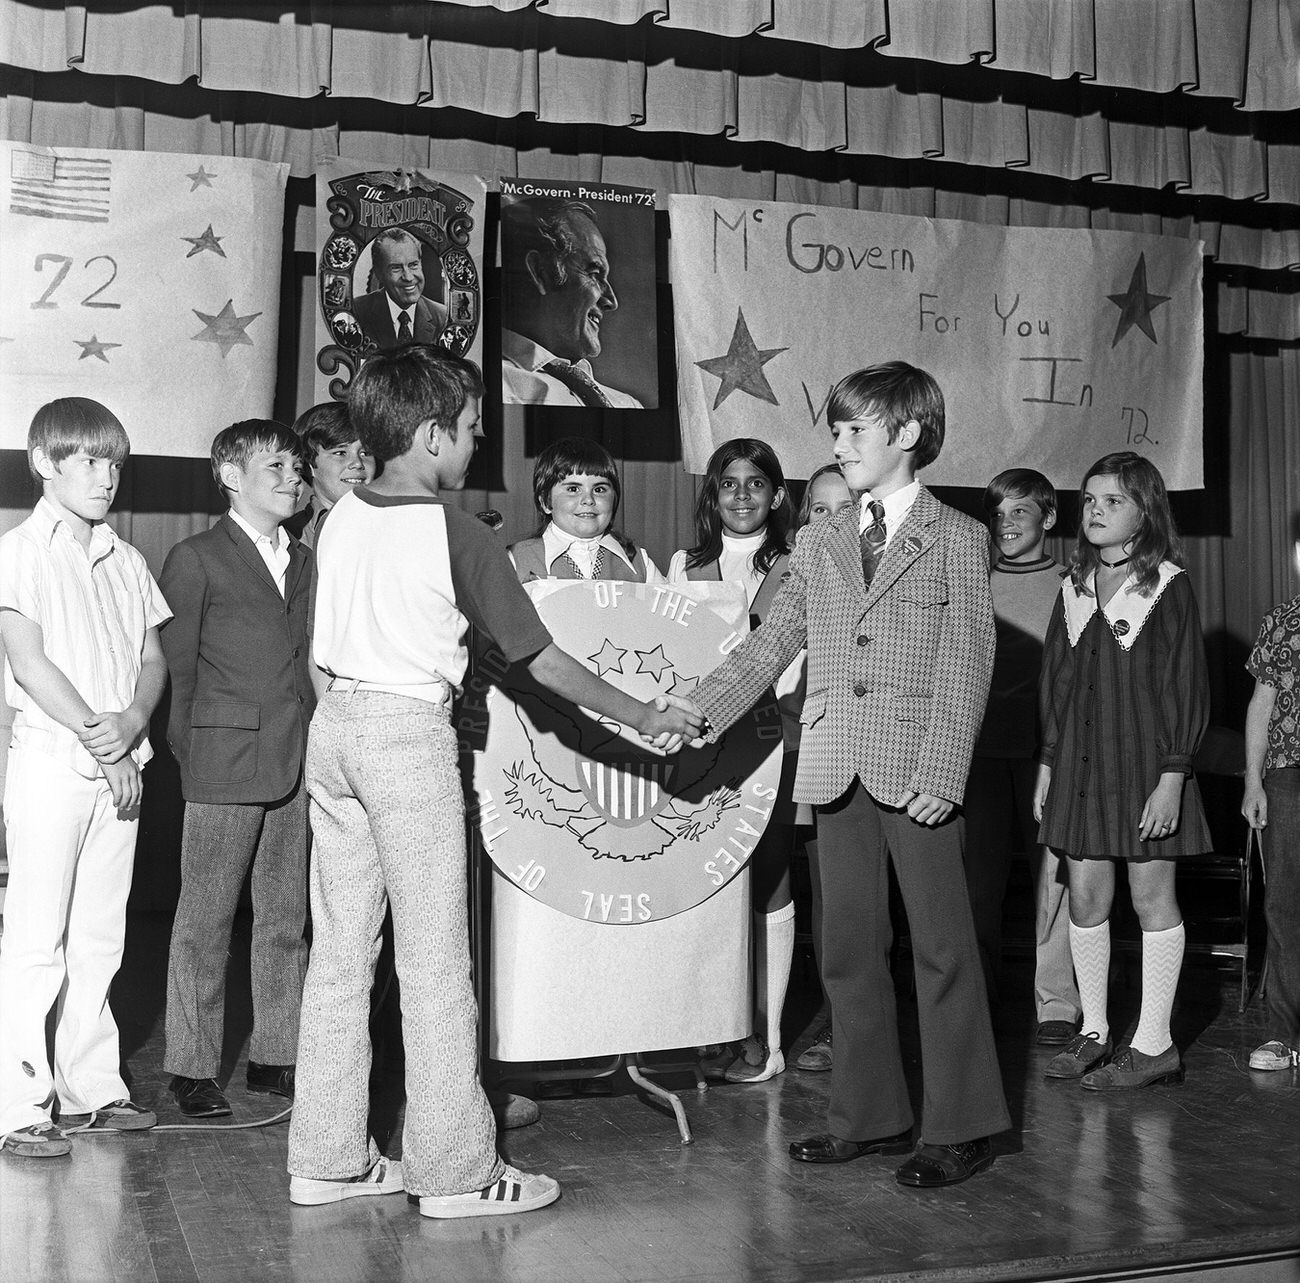 Children volunteering for a national children's poll for the 1972 presidential election, conducted by the "Hoot Owl" children's newspaper in Arlington, tabulated at Six Flags Over Texas.